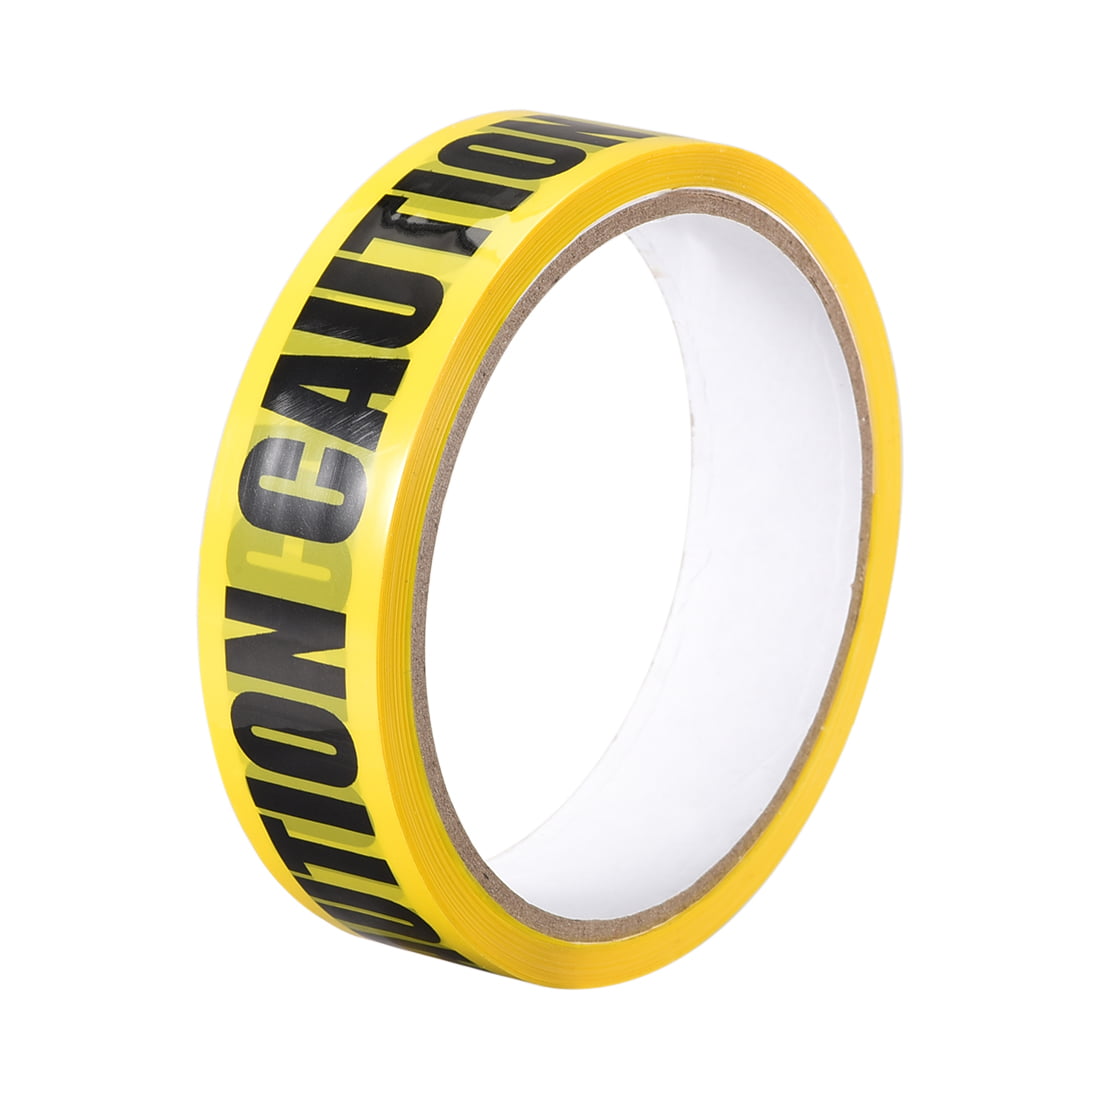 Caution Warning Tape Bold KEEP OUT Marking Yellow Black 82 Ft x 2 Inch LxW 